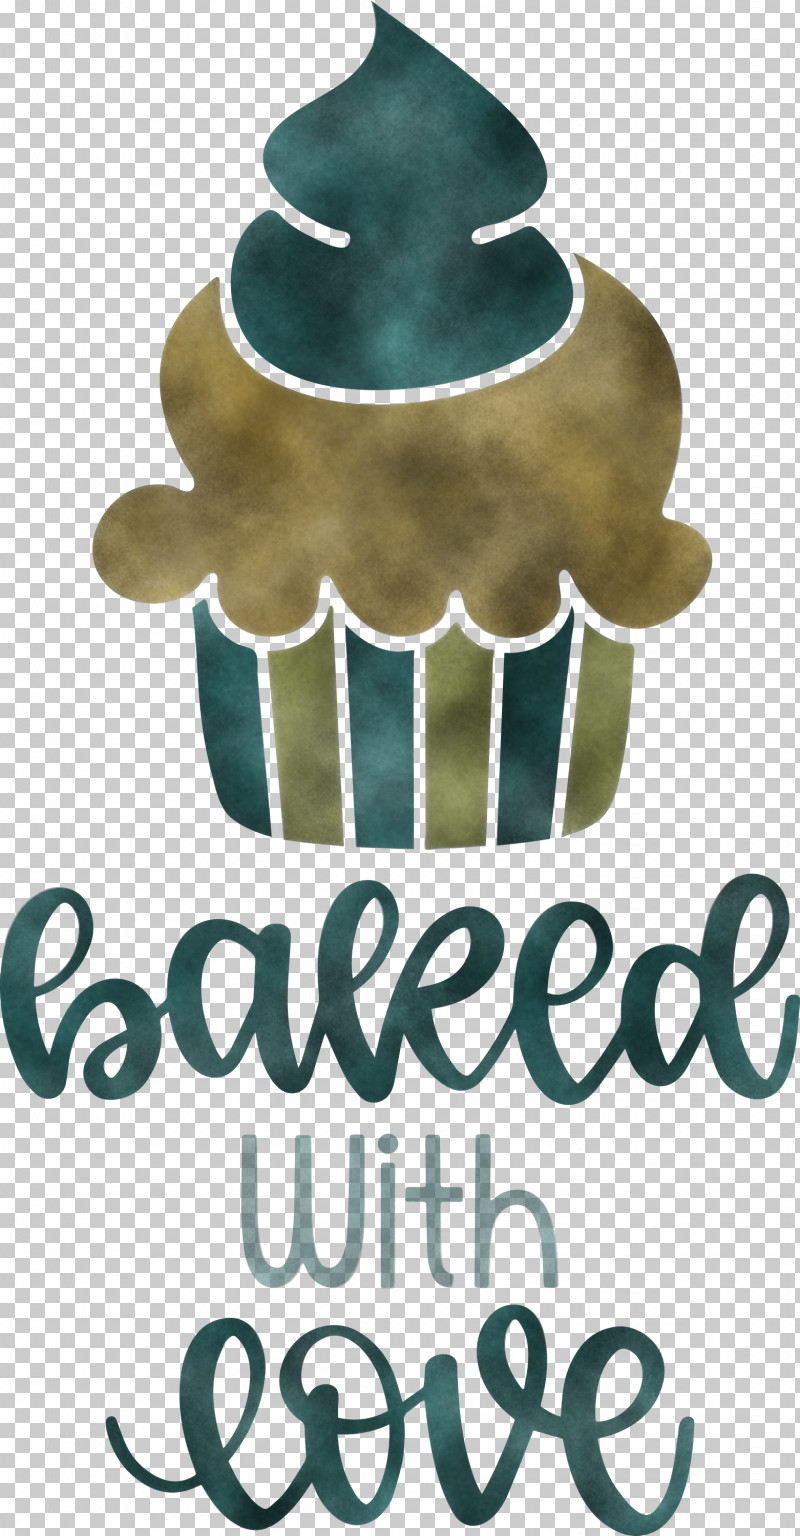 Baked With Love Cupcake Food PNG, Clipart, Baked With Love, Cupcake, Food, Kitchen, Logo Free PNG Download